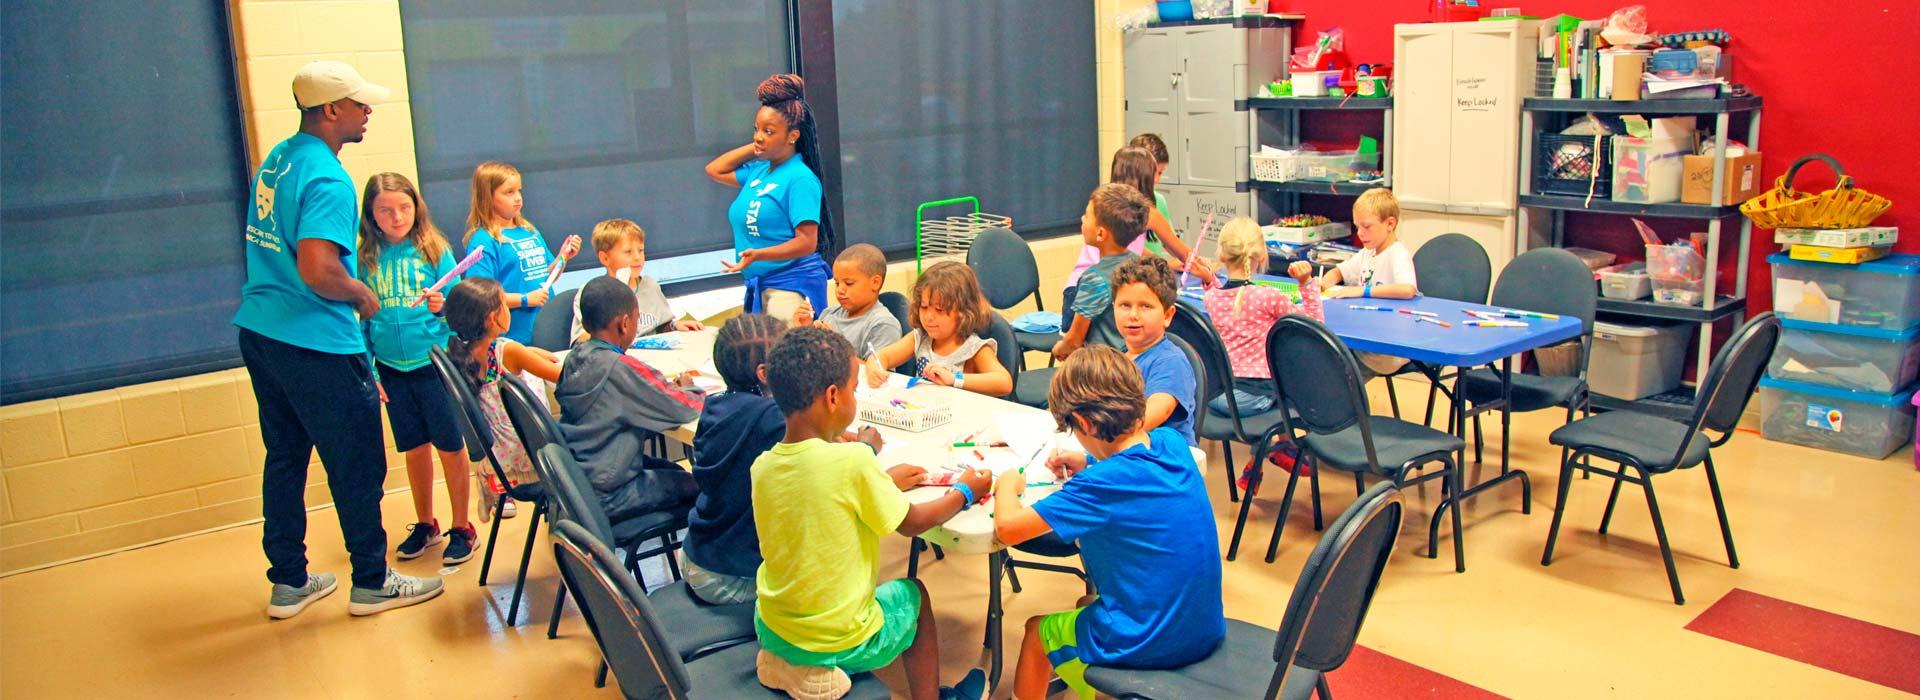 Summer campers creating art in the Arts Studio at the YMCA on Granby